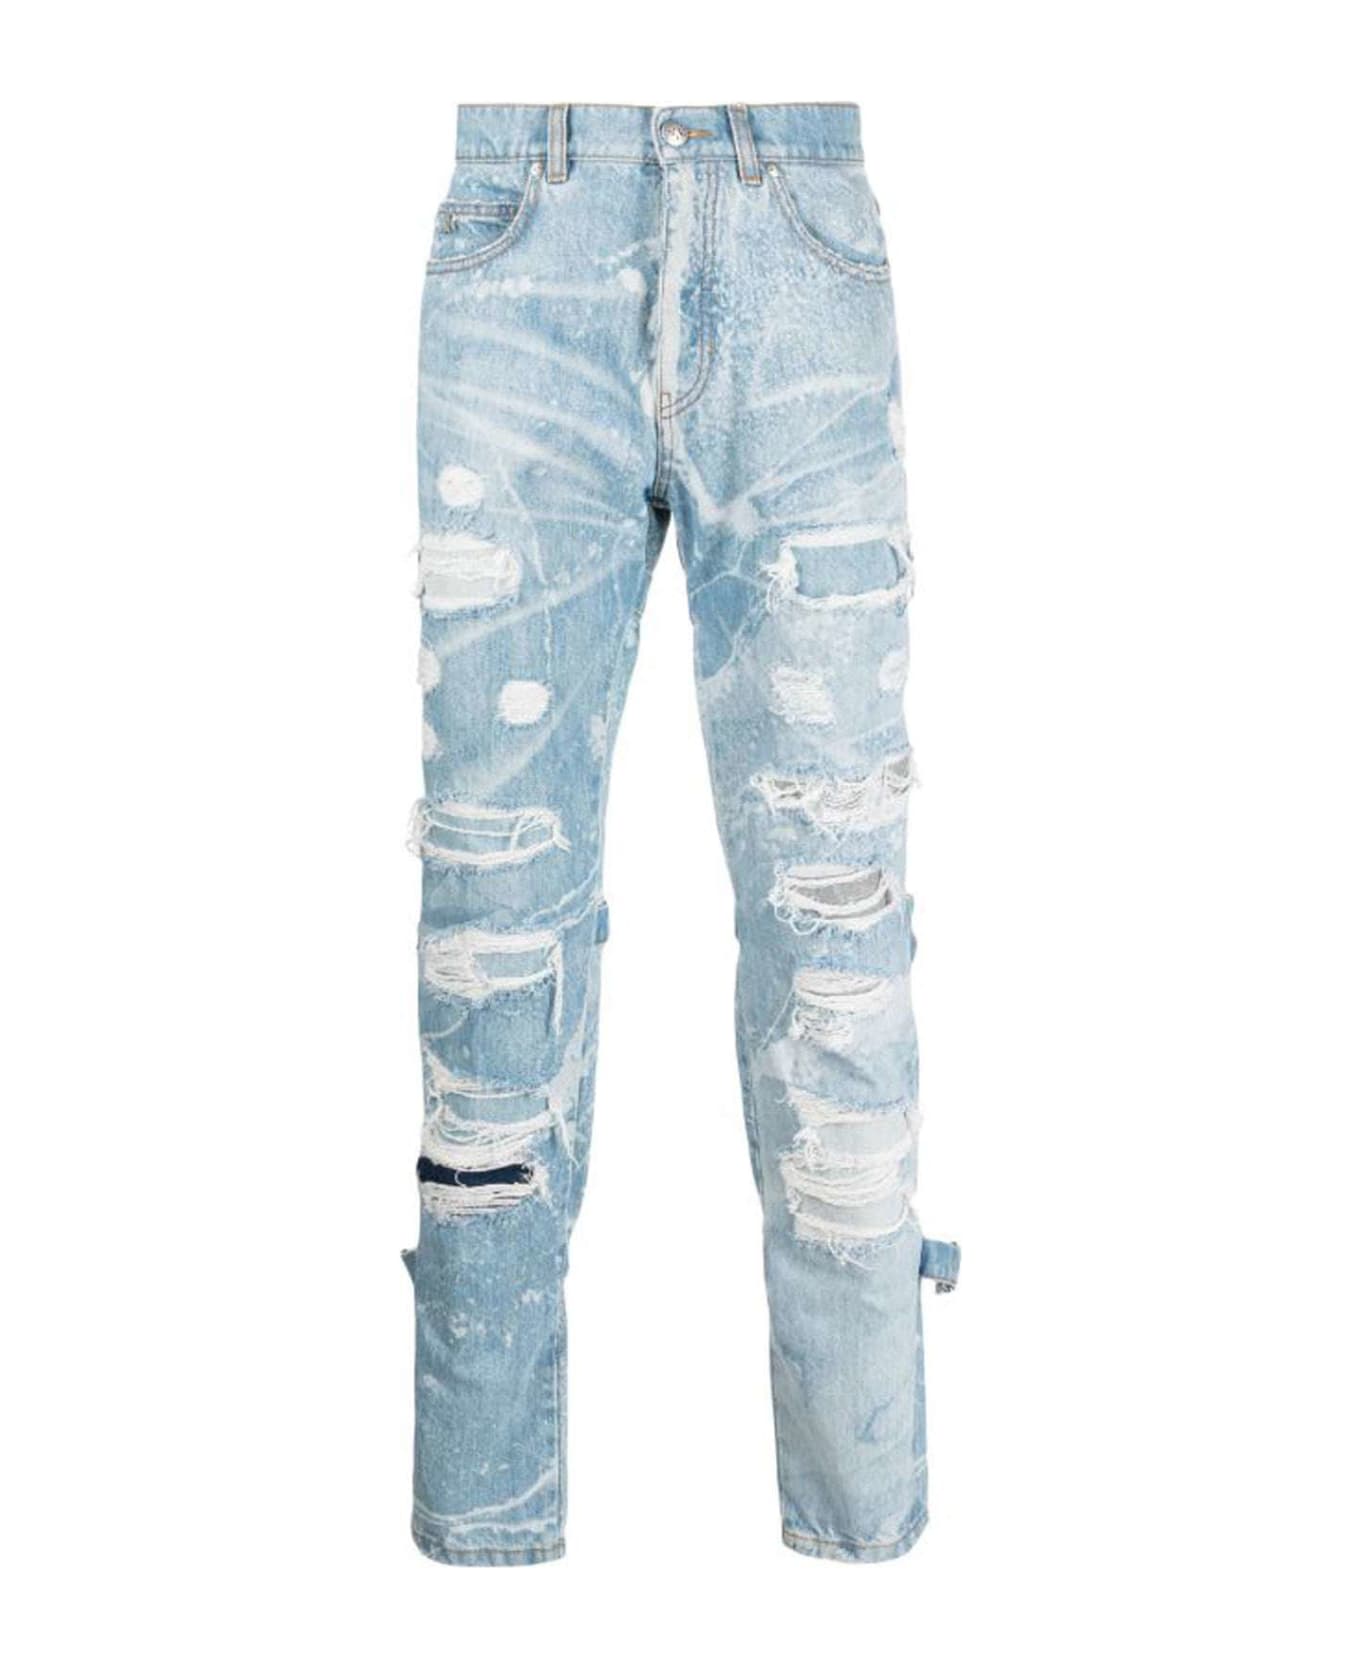 John Richmond Slim Wearability Jeans In 100% Cotton With Used Effect Lacerations - Denim デニム